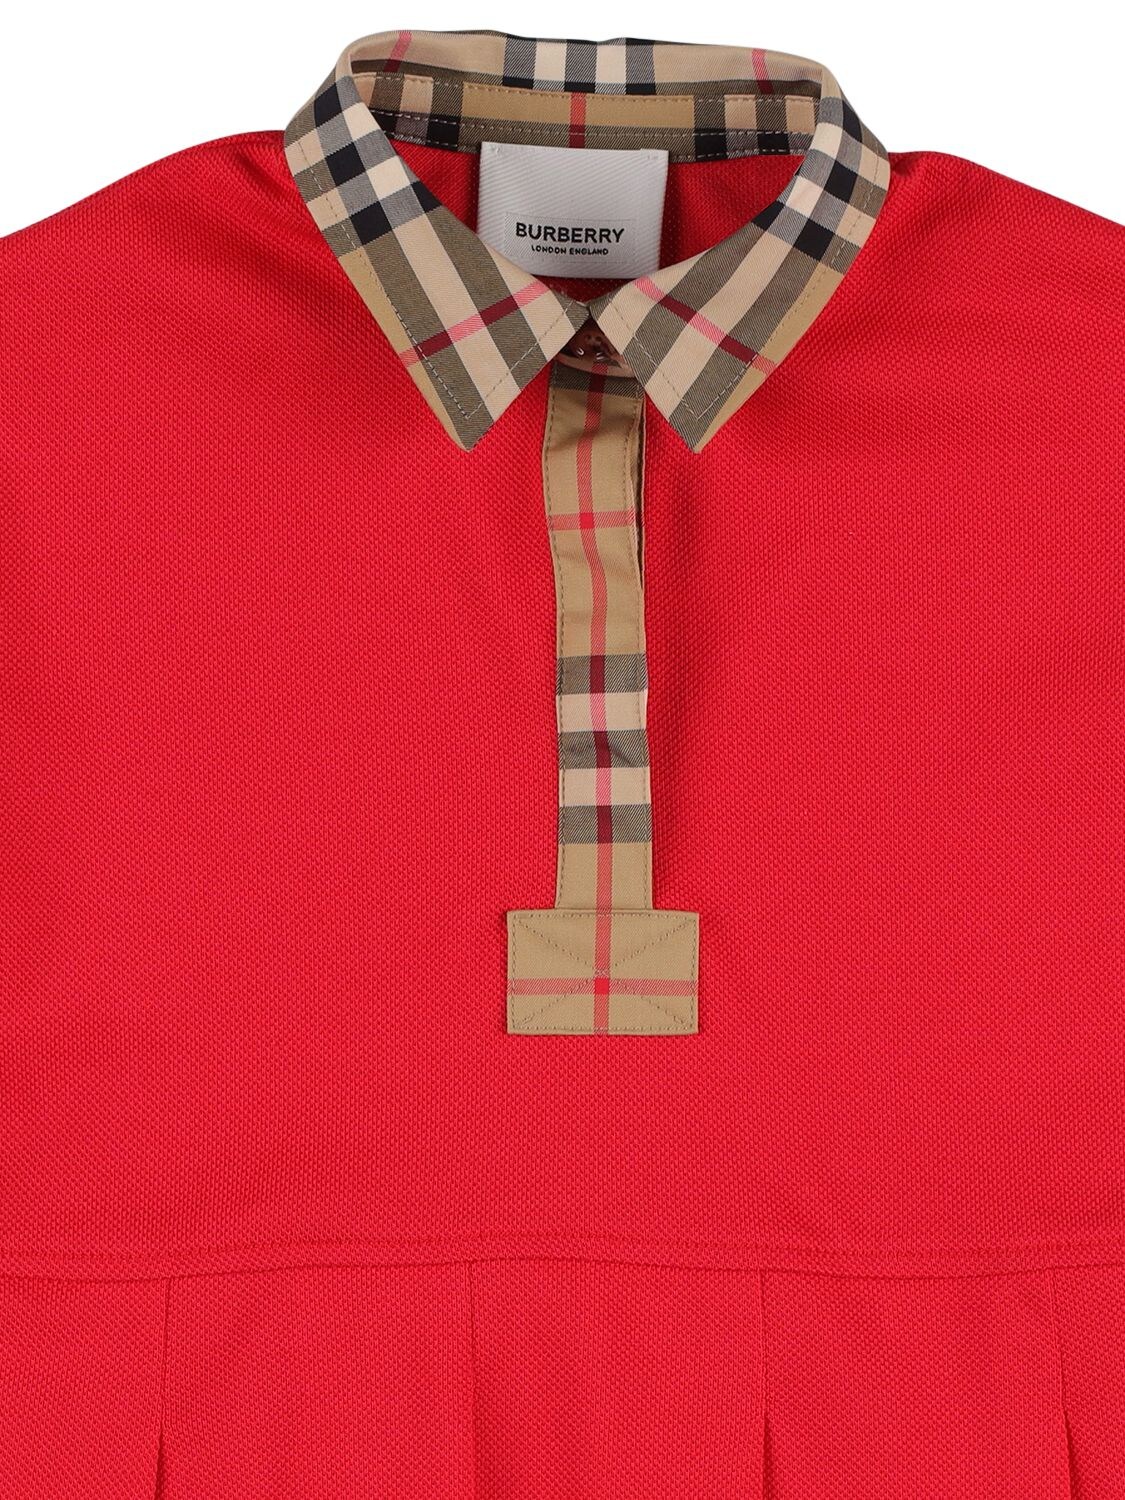 Shop Burberry Jersey Shirt Dress W/ Check Inserts In Red